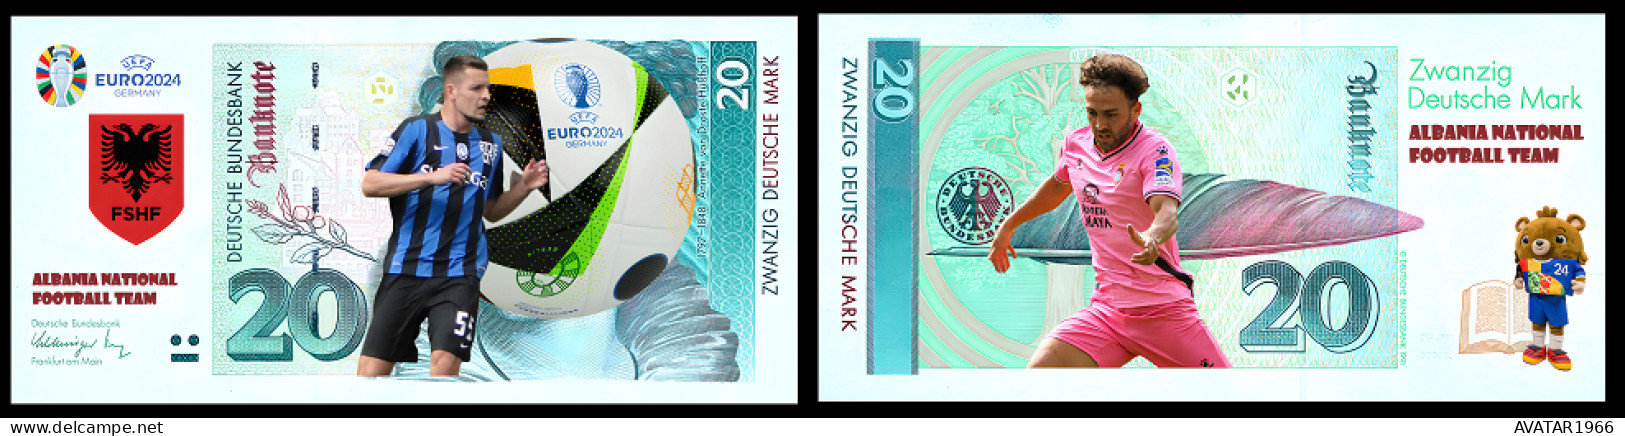 UEFA European Football Championship 2024 Qualified Country Albania 8 Pieces Germany Fantasy Paper Money - [15] Commémoratifs & Emissions Spéciales